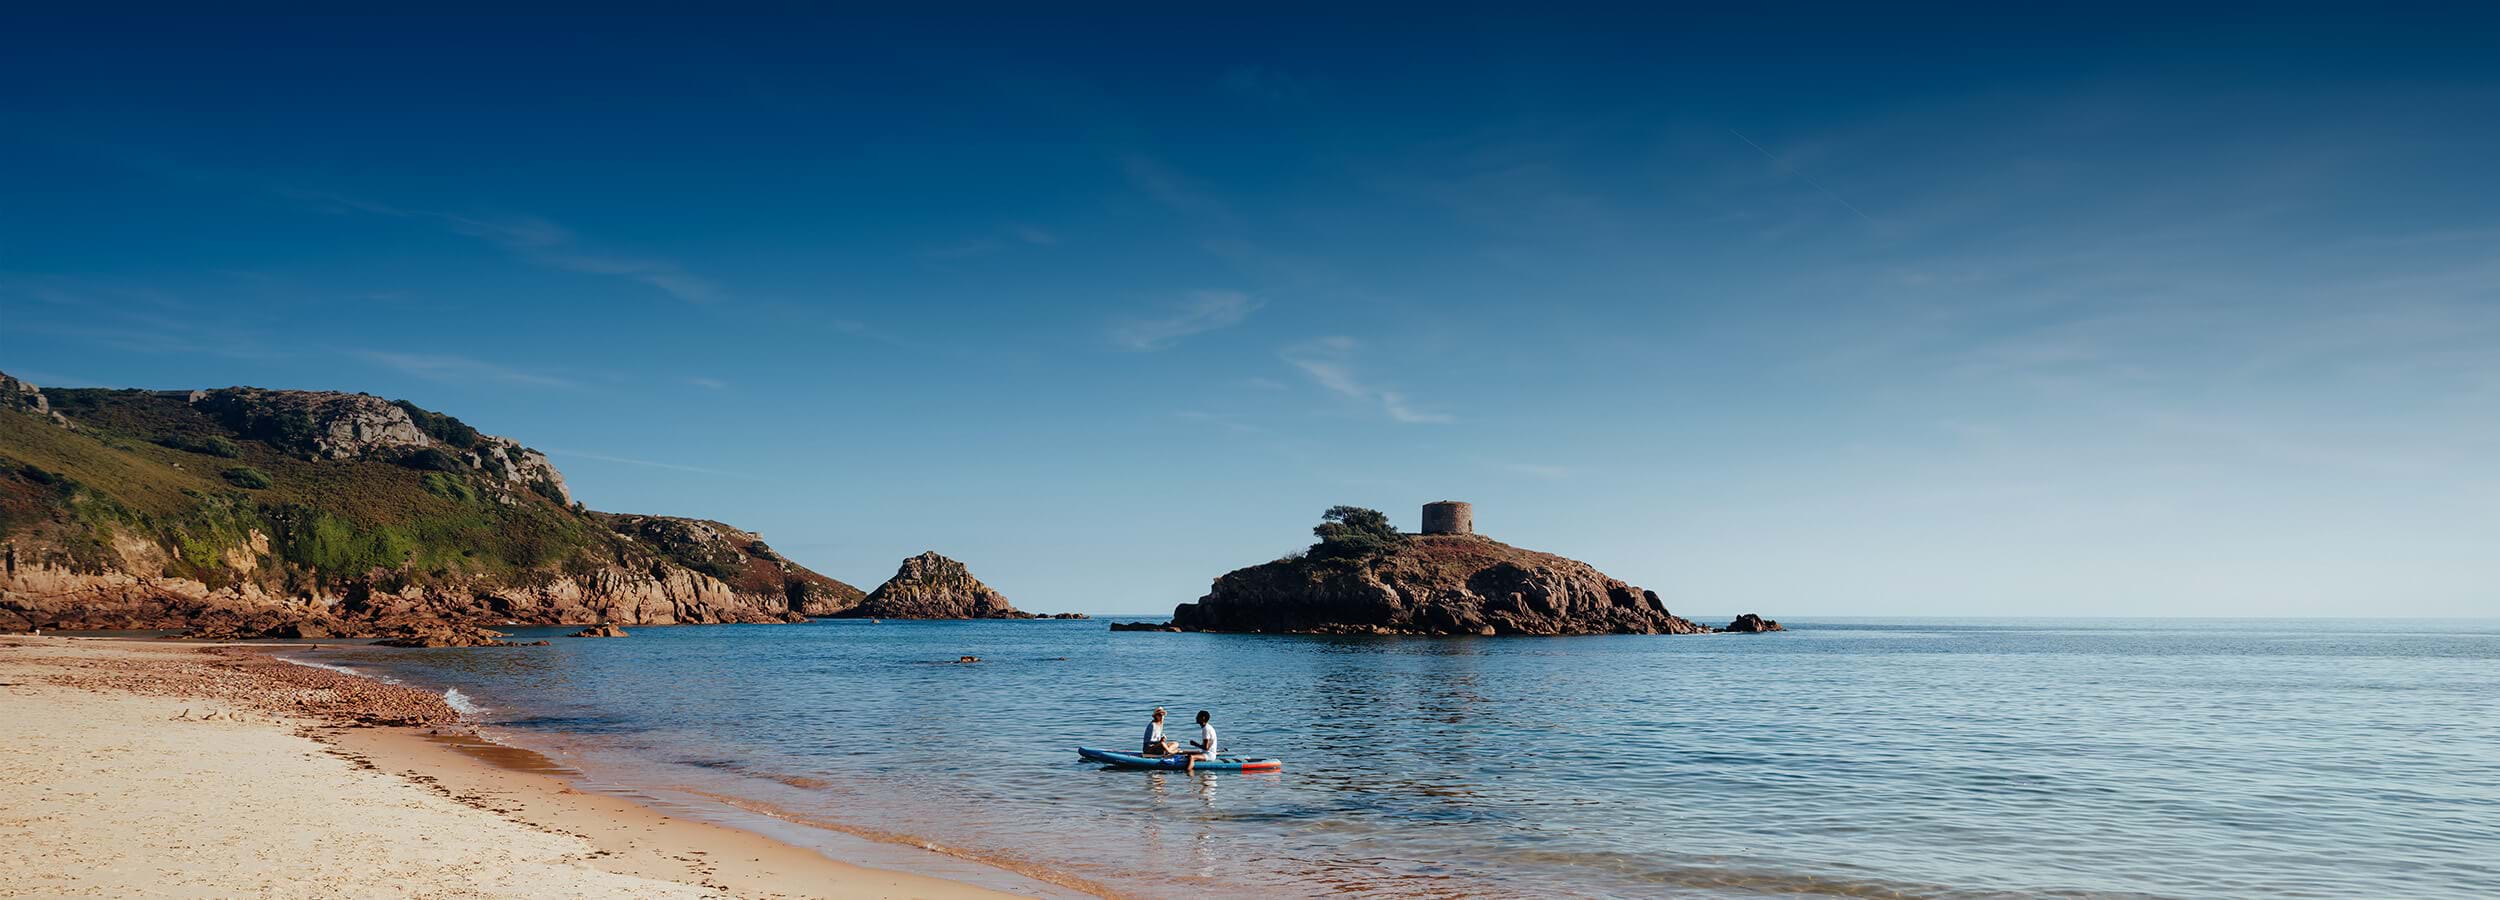 Sail away to Jersey from £95pp with your car